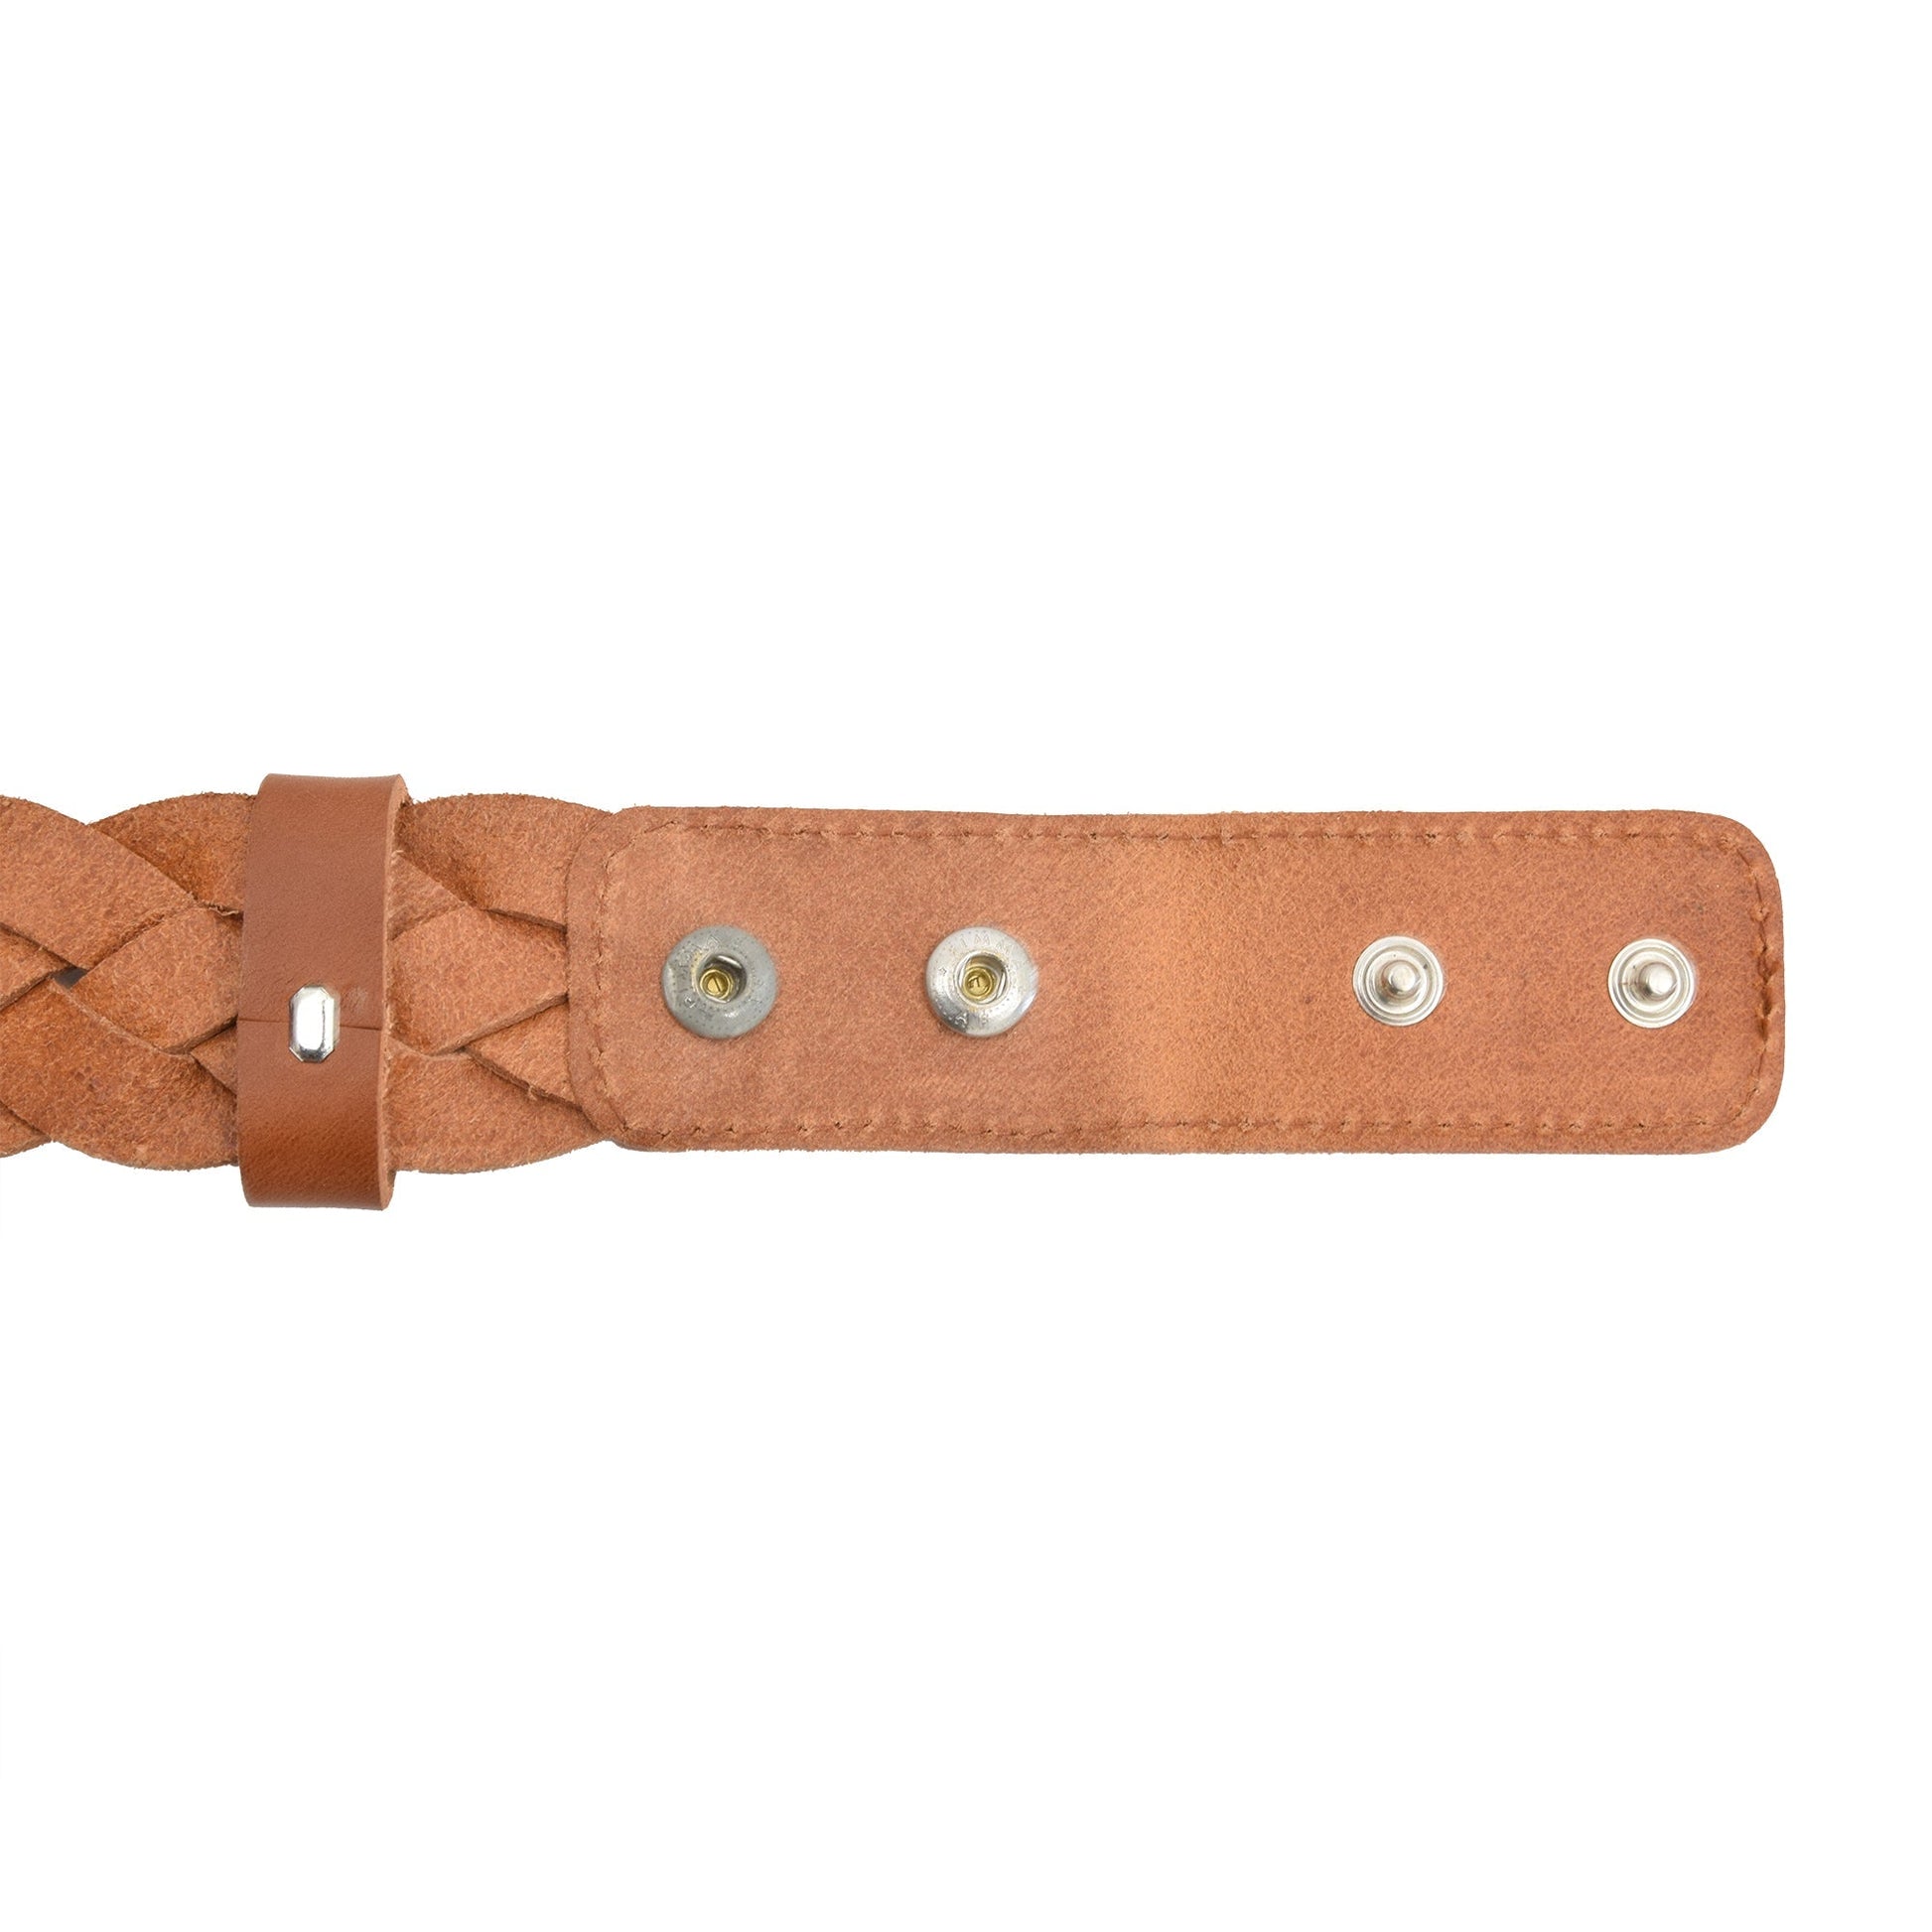 Astral Leather Belt Tan with Changeable Buckle - Belts Zengoda Shop online from Artisan Brands